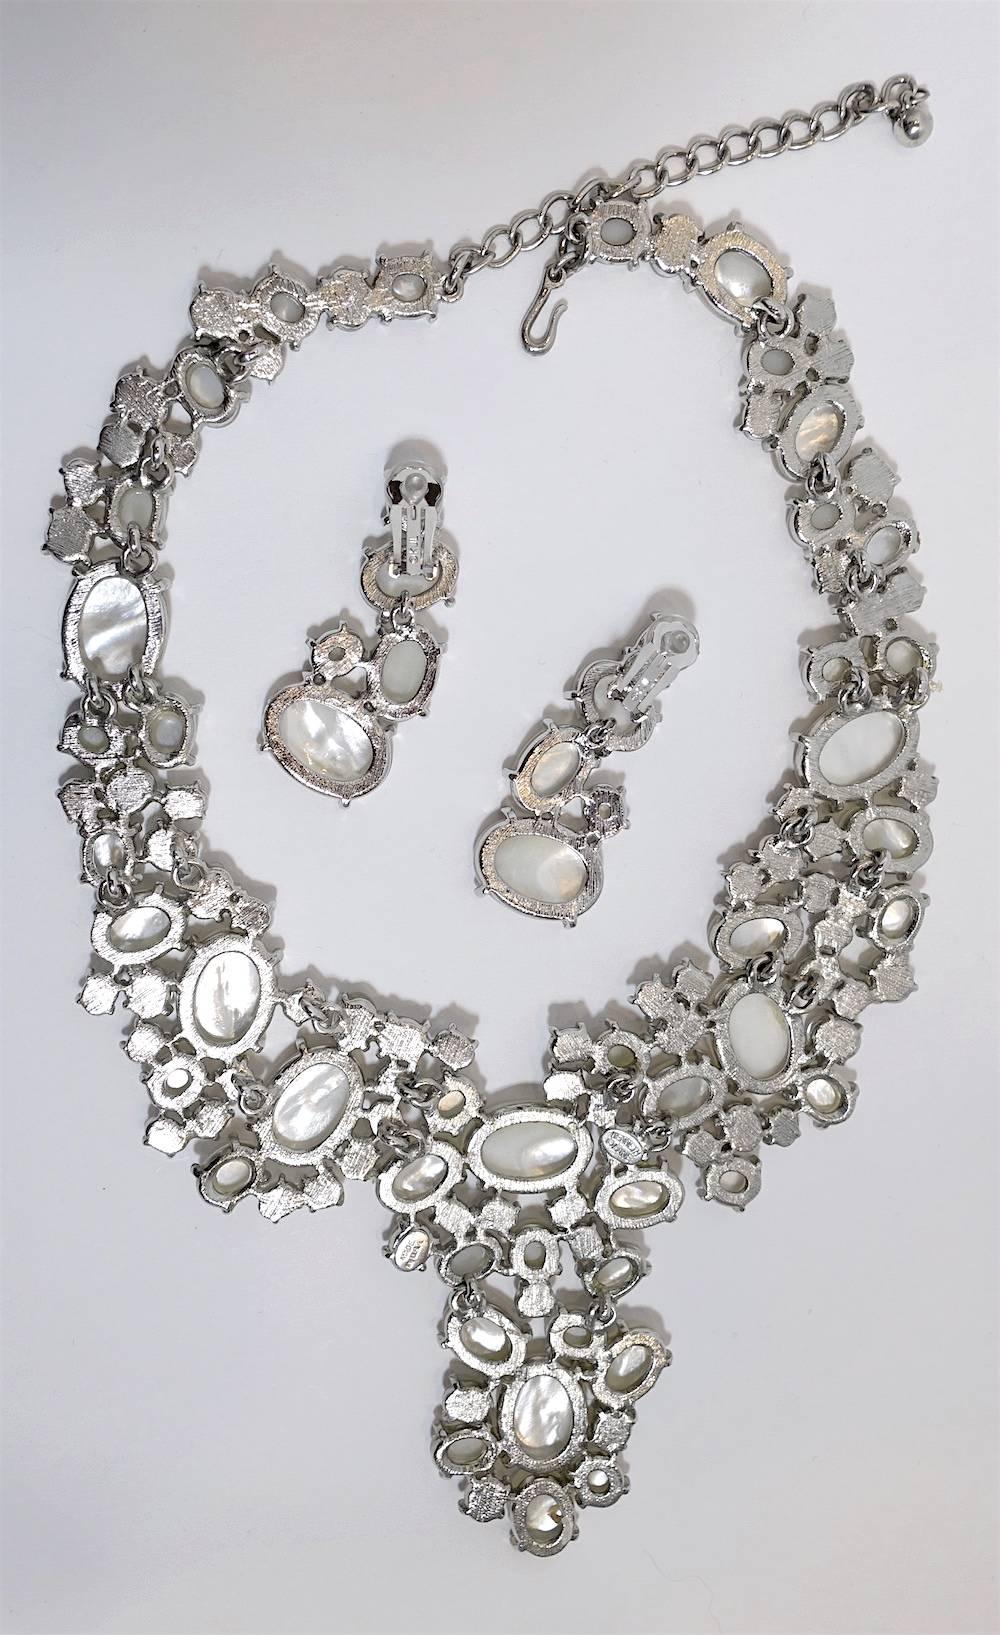 This Kenneth Jay Lane necklace & earrings feature faux “mother-of-pearl” cabochons in a nickel-free silver-plated base metal setting.  The necklace measures 20” with a 3-1/2” front drop and has a spring closure.  The matching clip earrings are